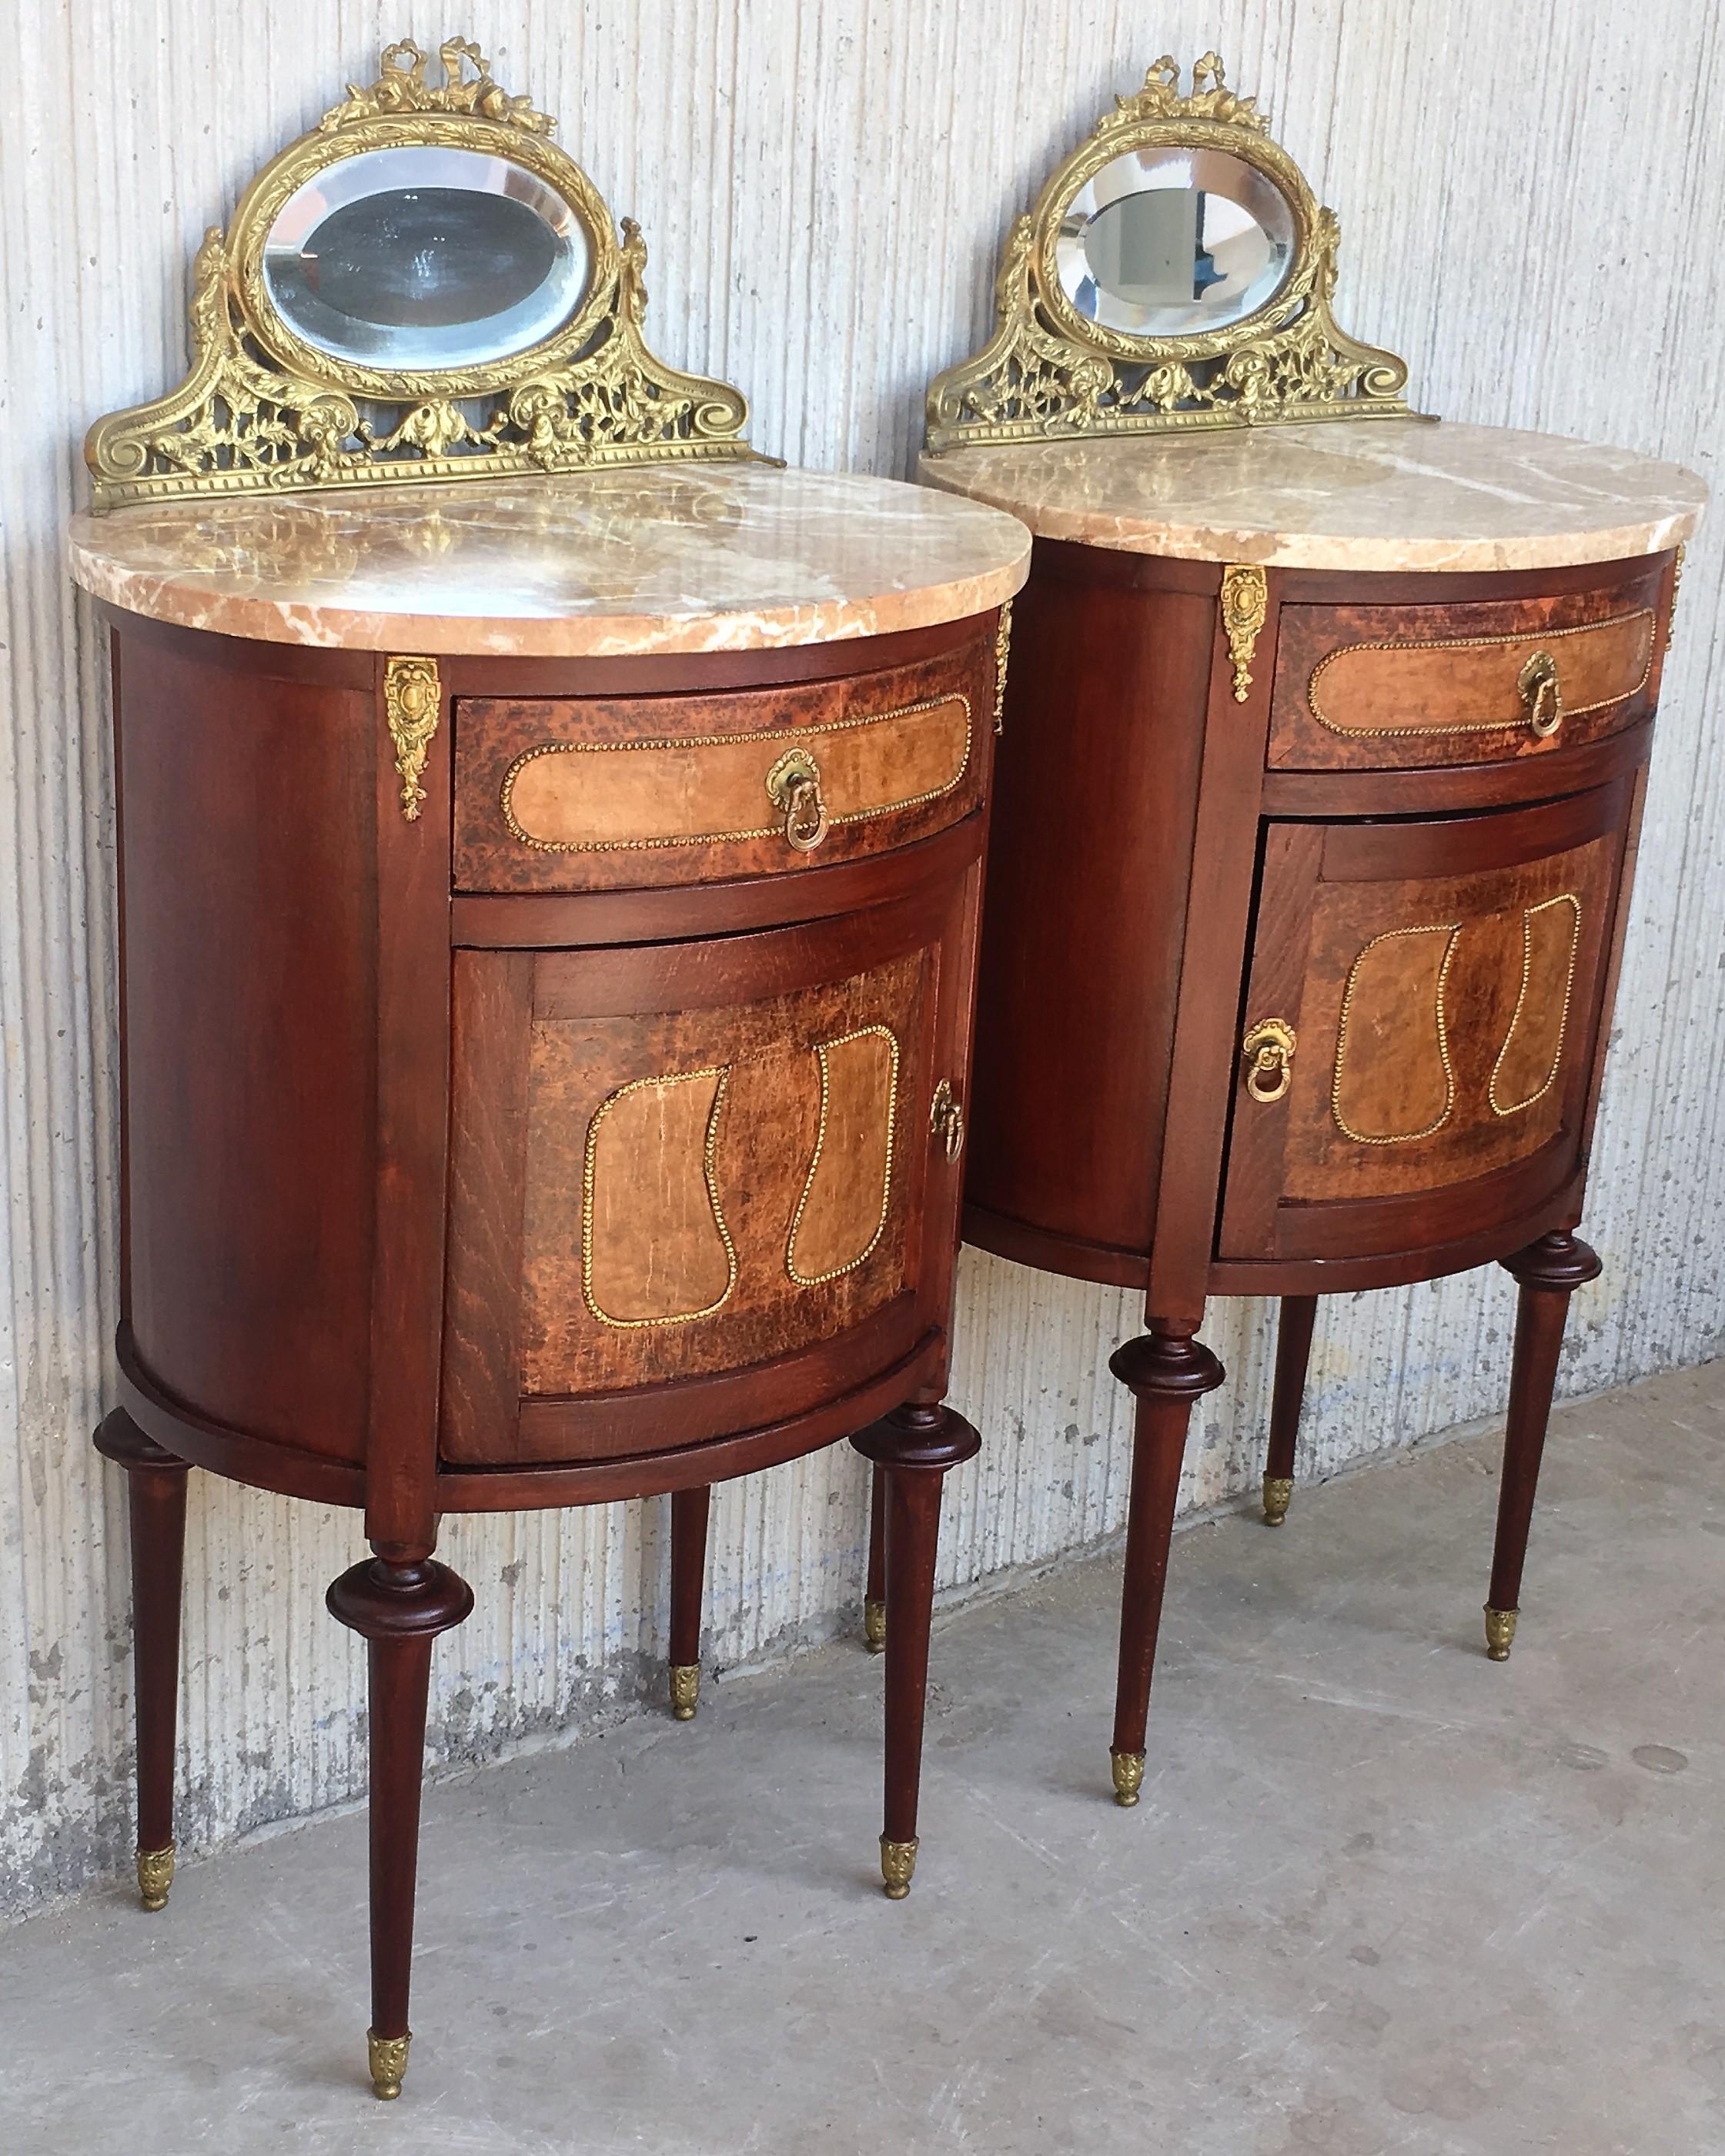 Louis XVI style pair of Marquetry nightstands with bronze crest one drawer and one compartment.
Originals handles and garniture.
Completely restored.

Total Height : 38.18 in
Height to the tabletop: 33.46 in